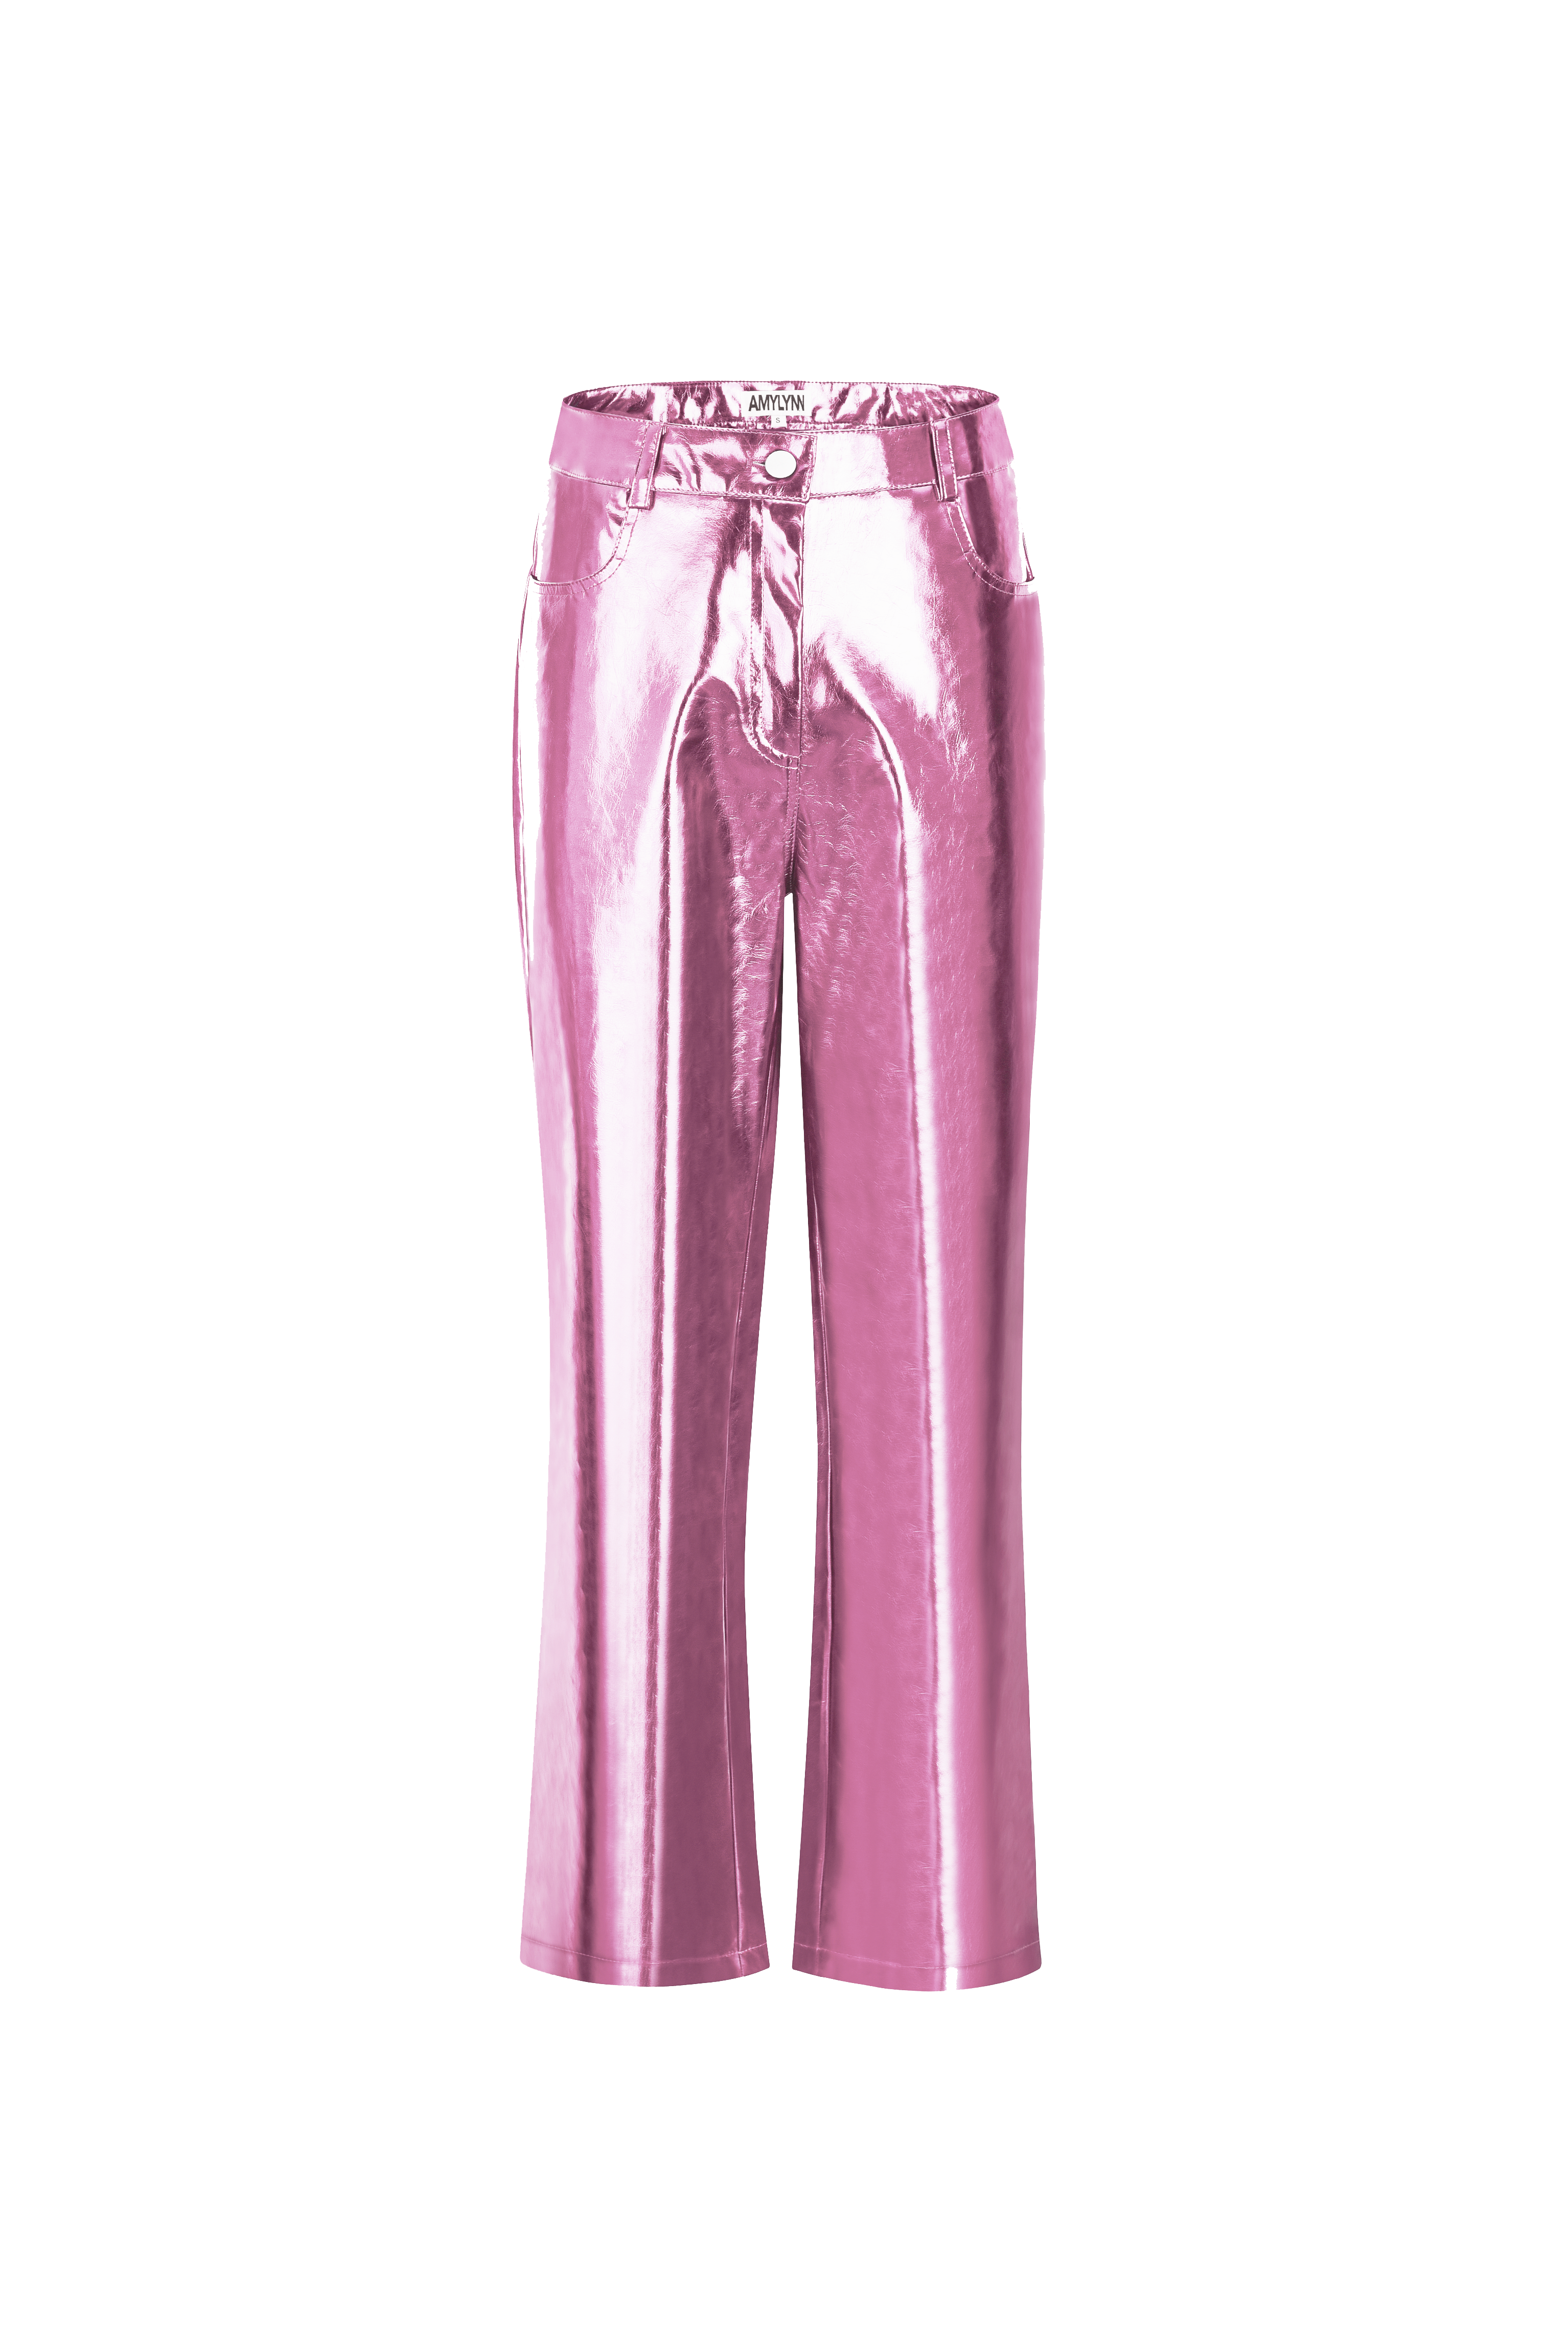 Lupe Pale Pink Metallic Trousers